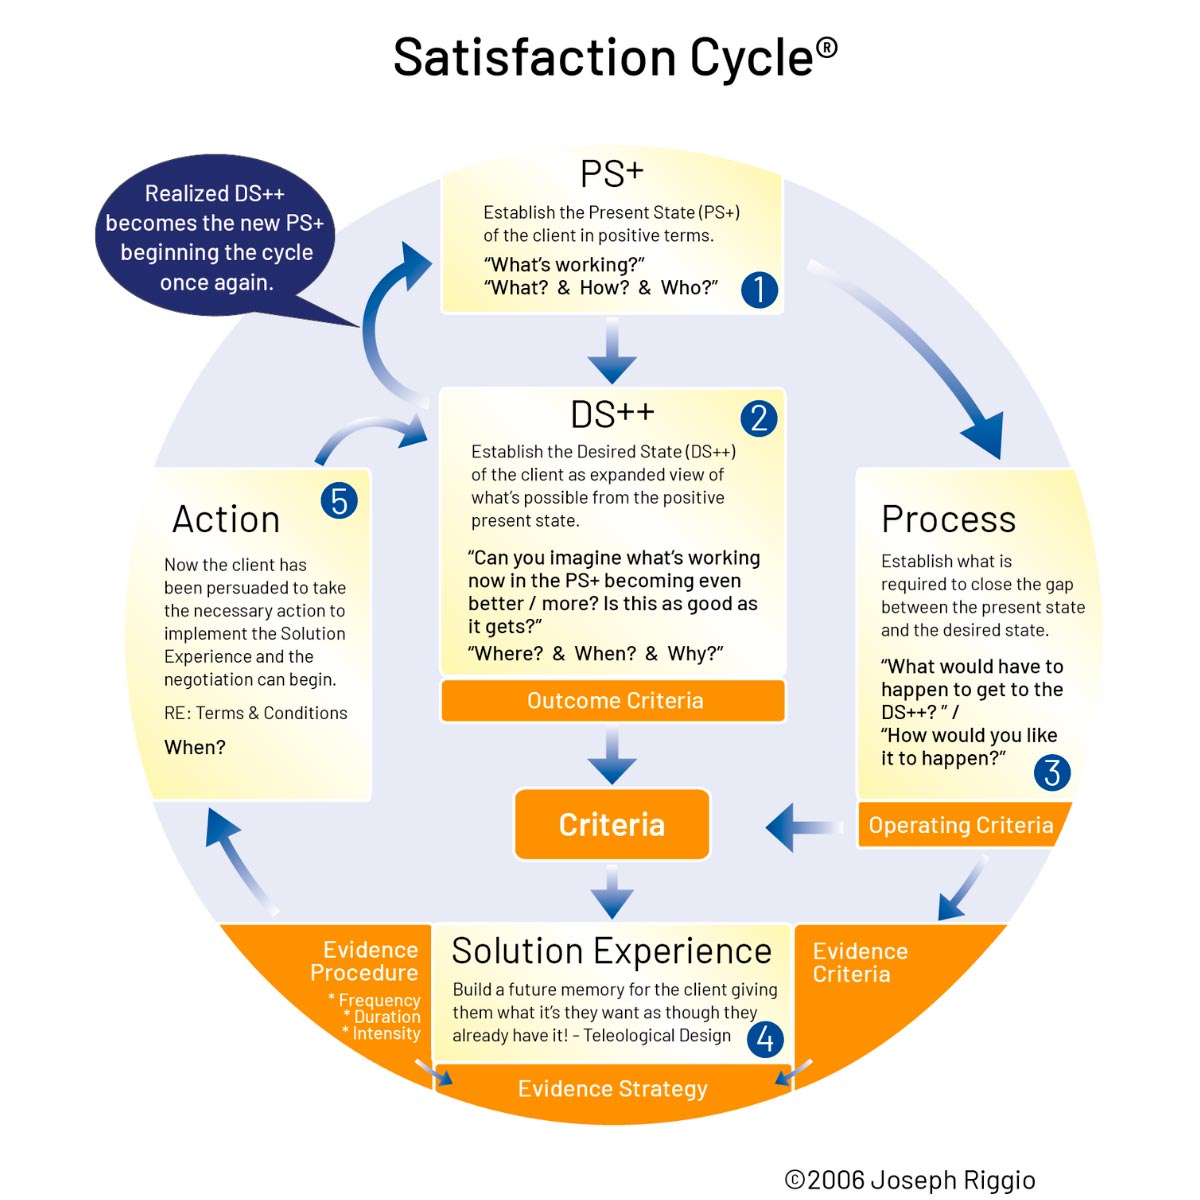 The Satisfaction Cycle